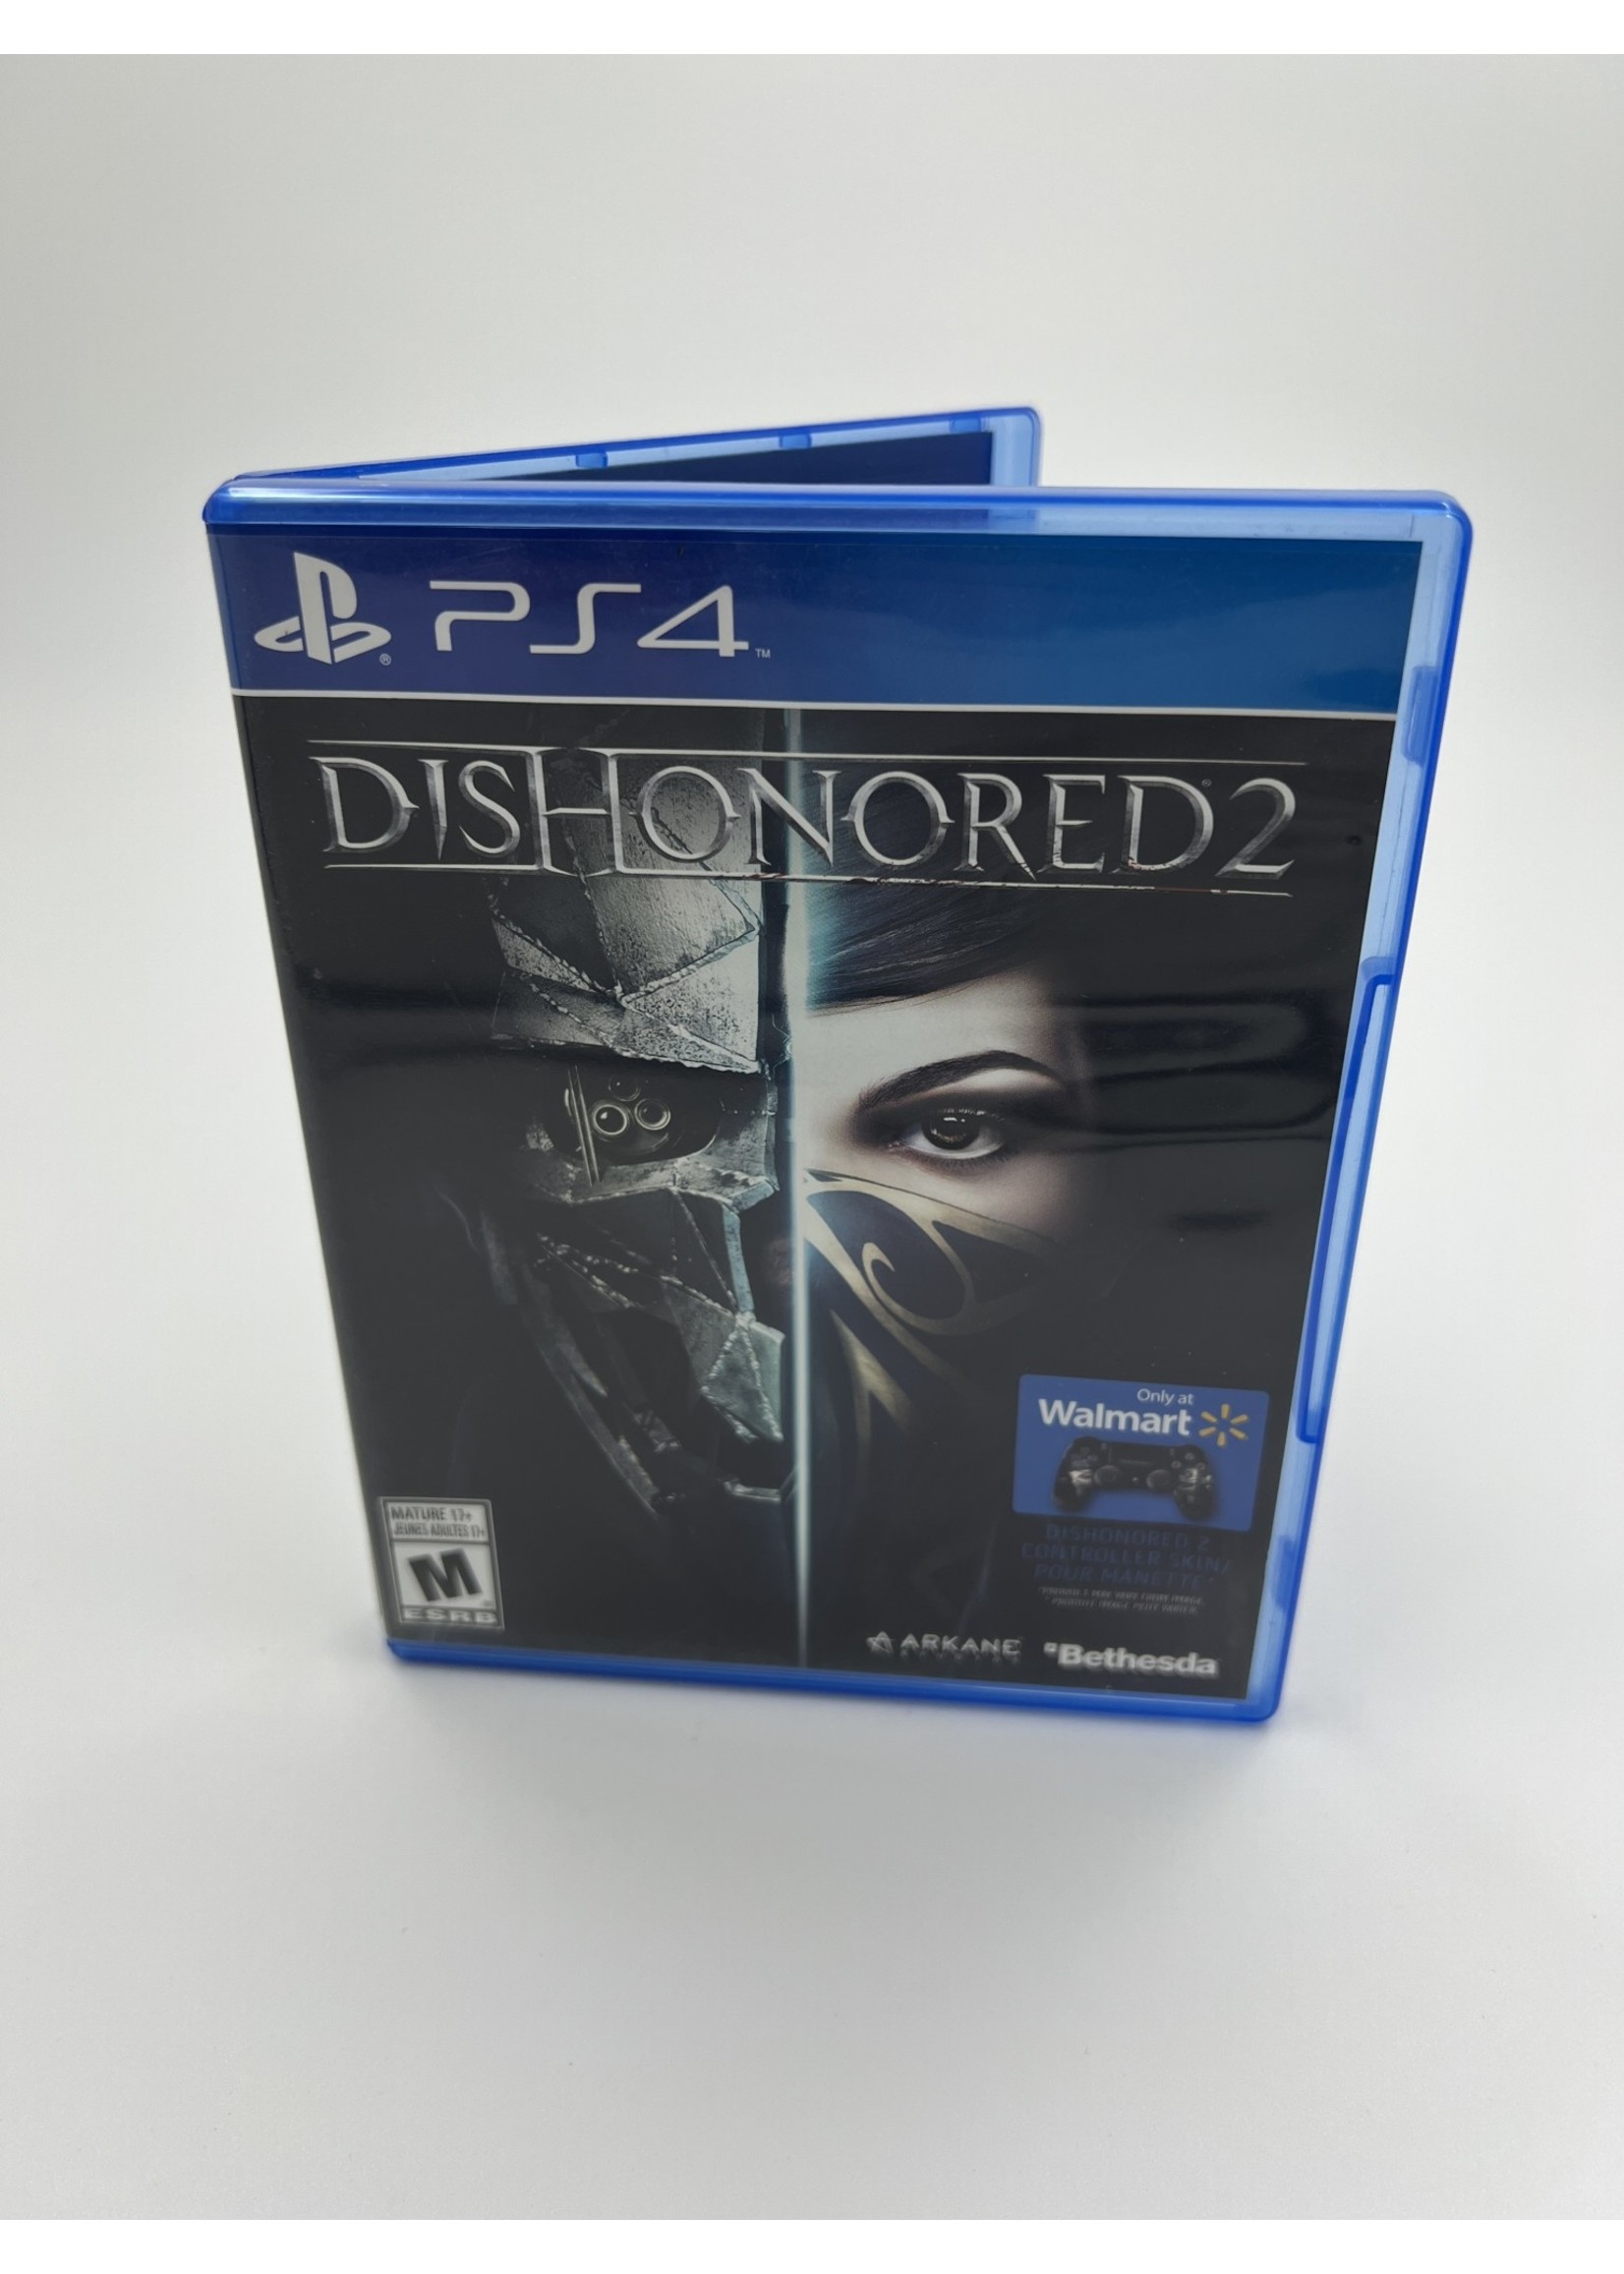 Sony Dishonored 2 Ps4